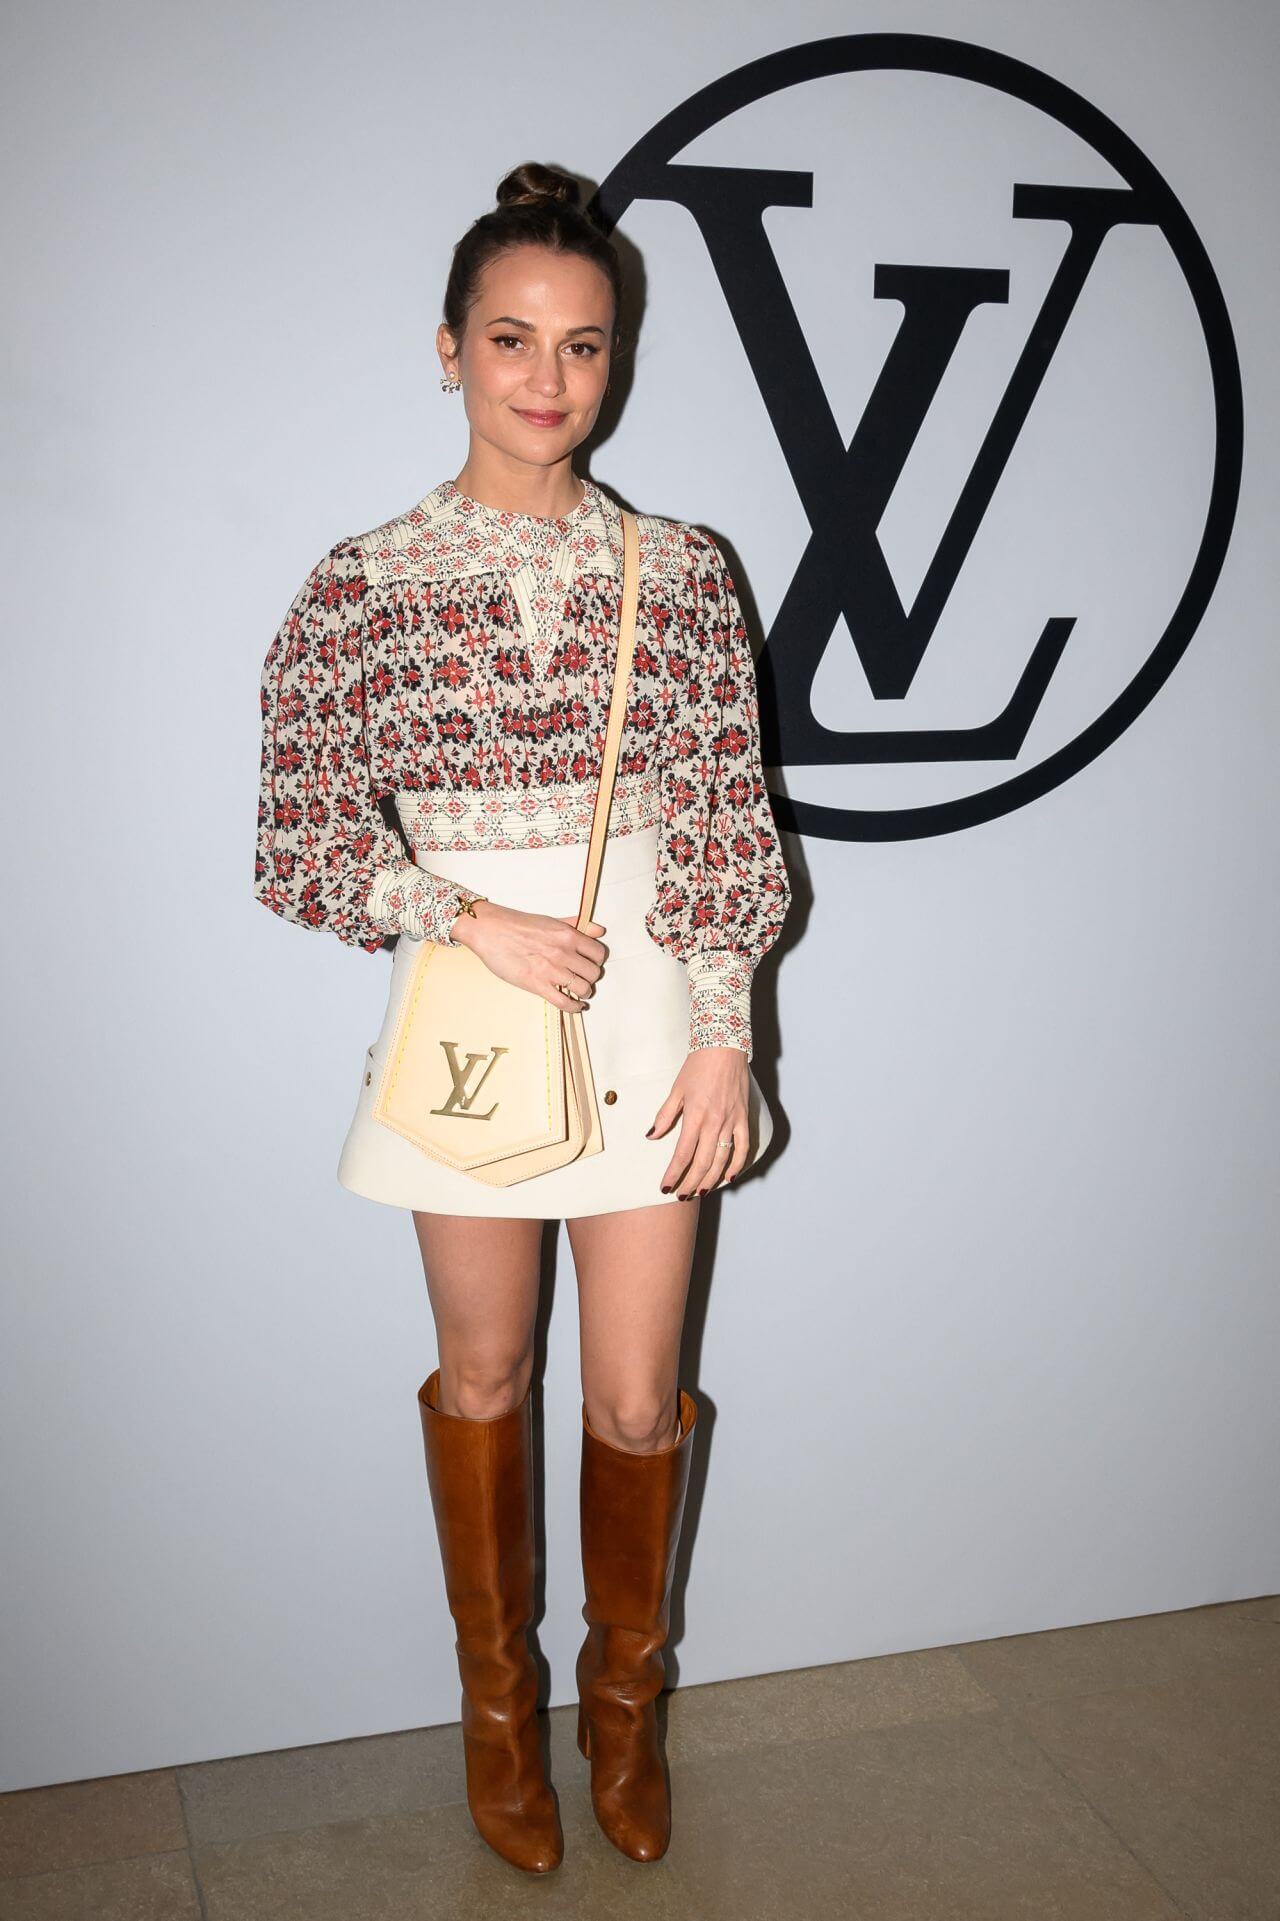 Alicia Vikander - Gorgeous Looks In Printed Puffed Sleeves Top With White Mini Skirt Outfits